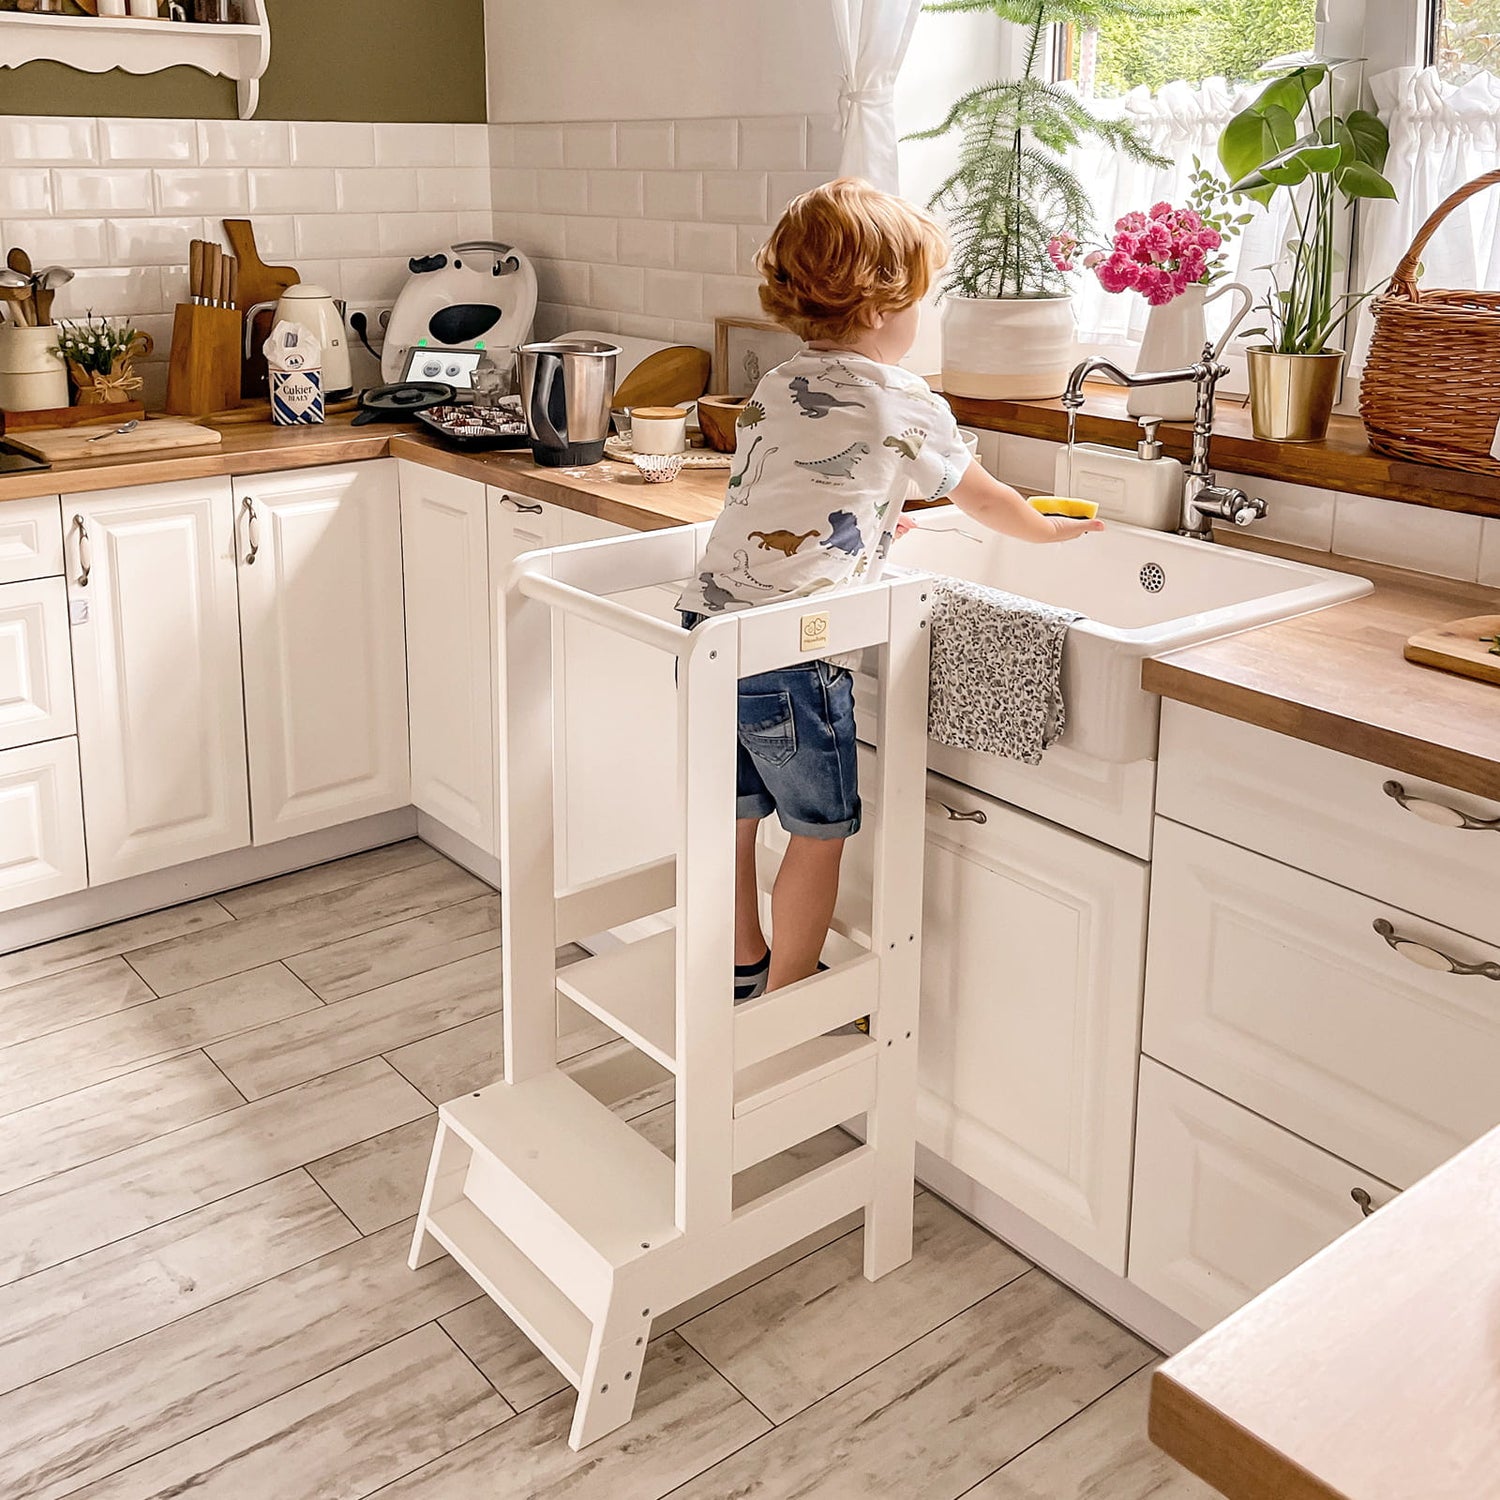 boy standing on meowbaby kitchen helper learning tower in white